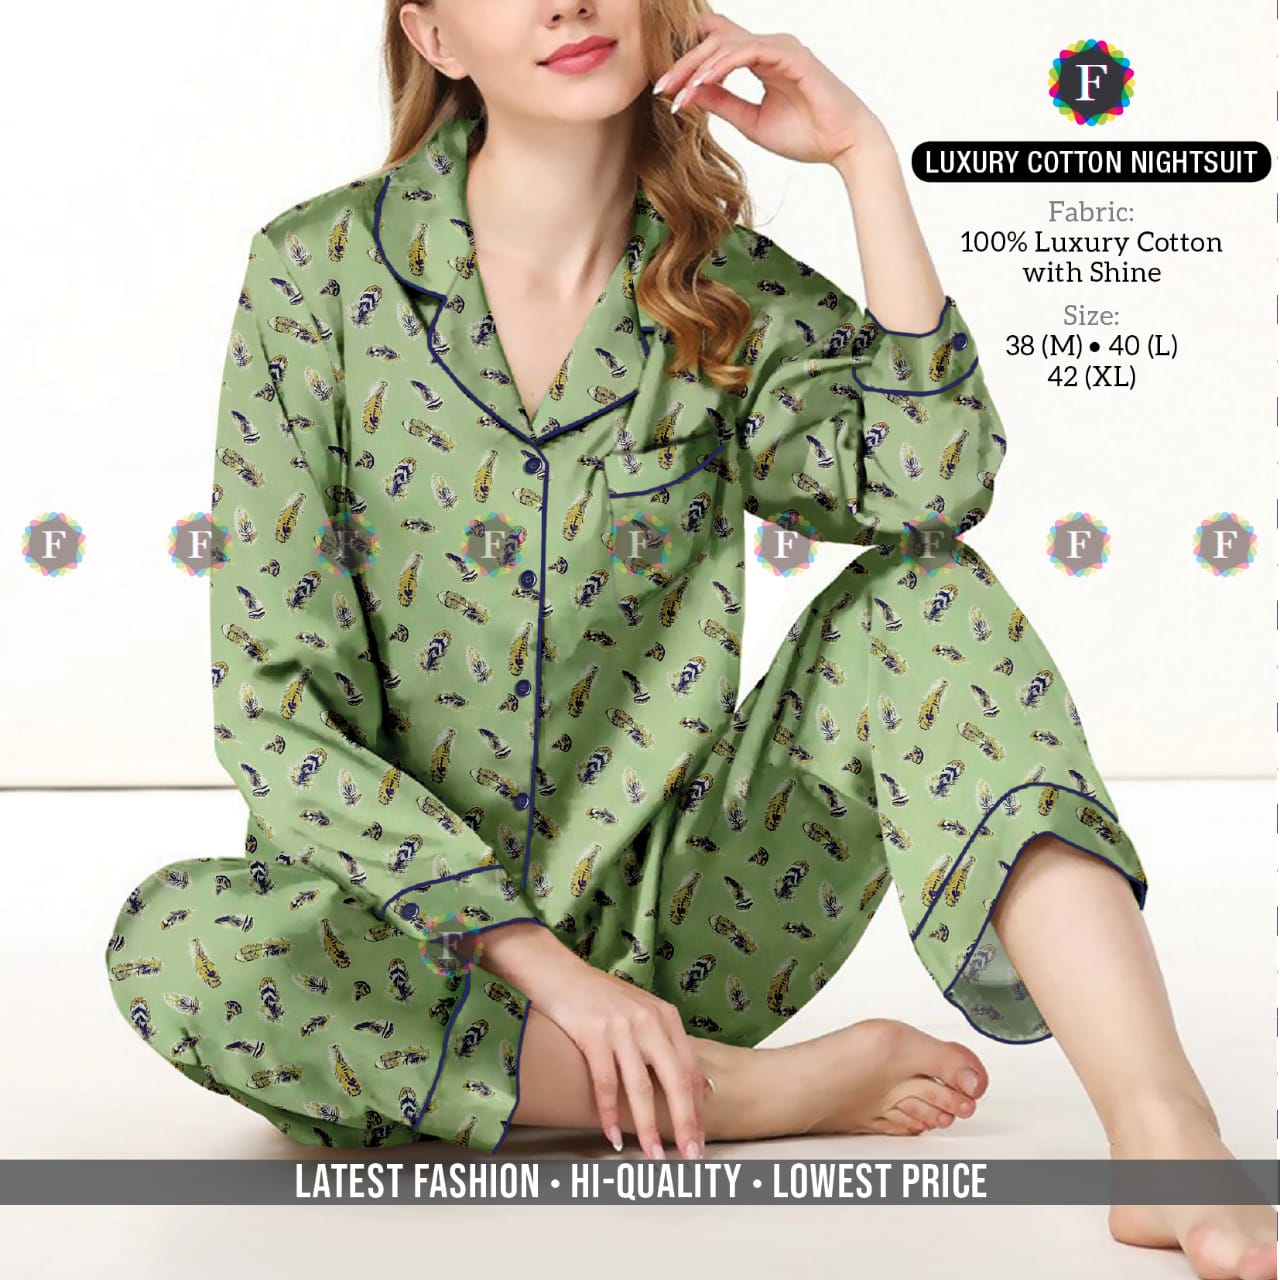 pr Luxury Cotton Nightsuit Exclusive Stylish Cotton With Shine Night Suits